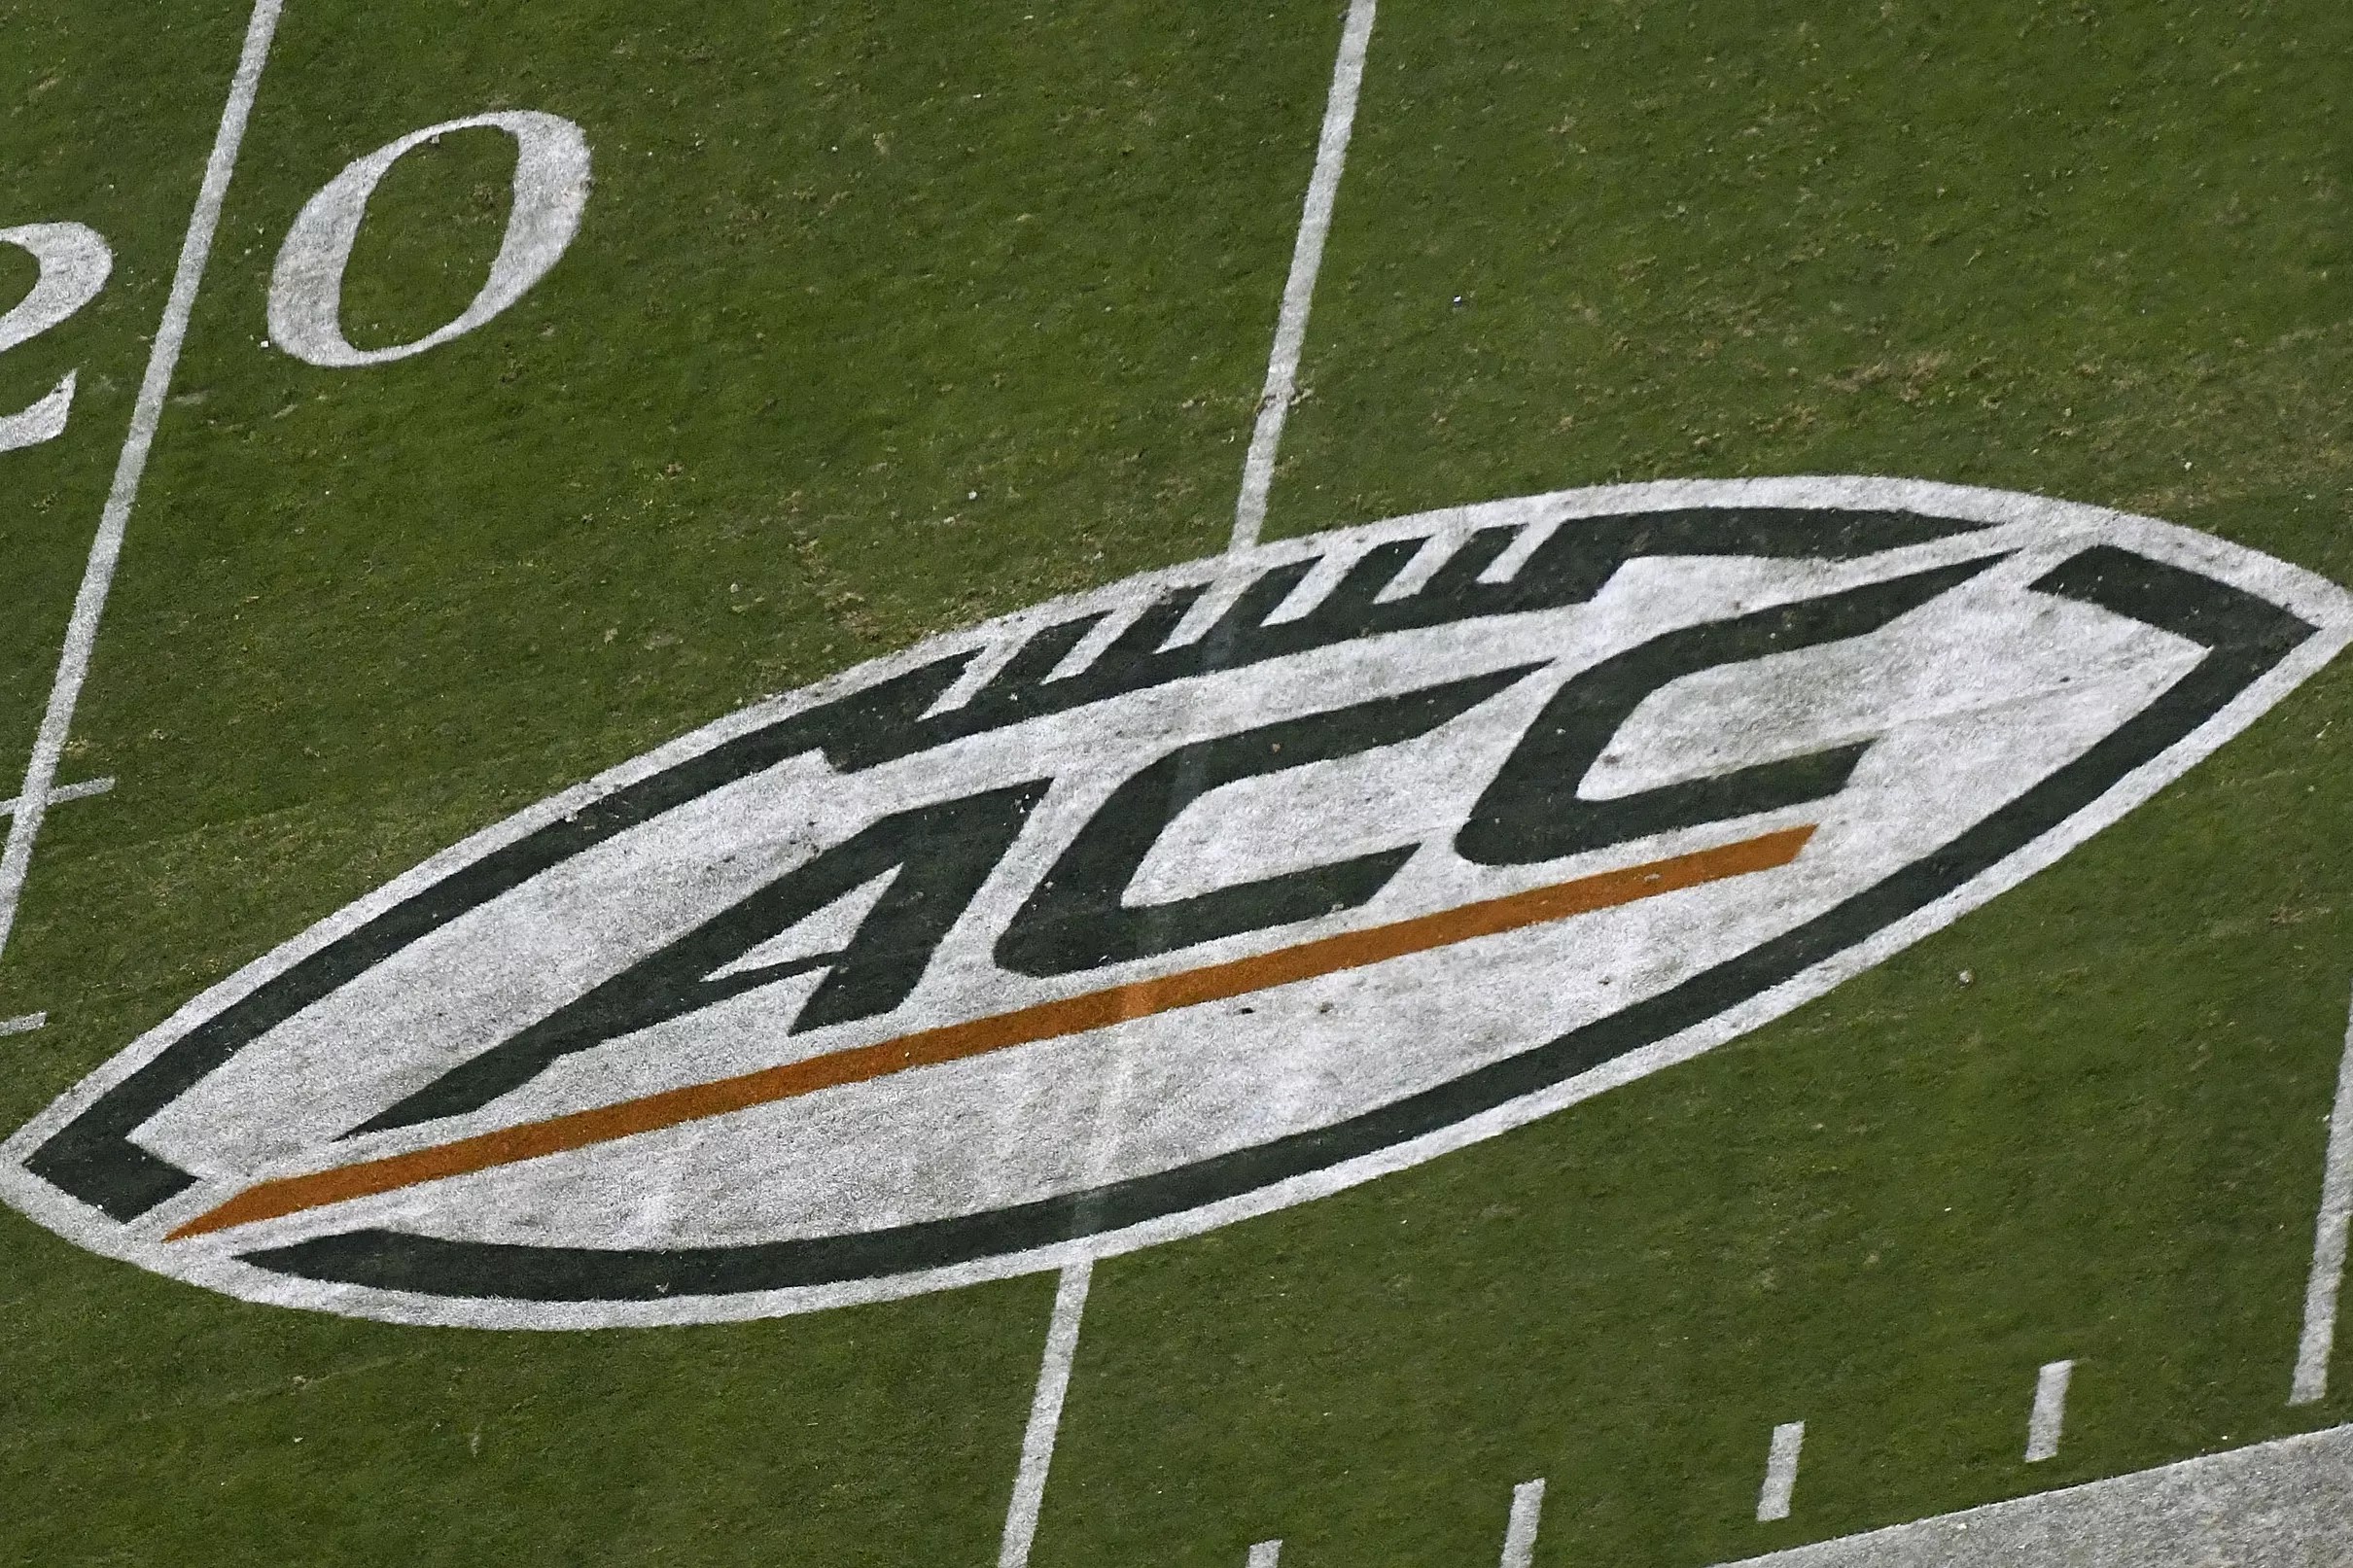 acc conference football predictions